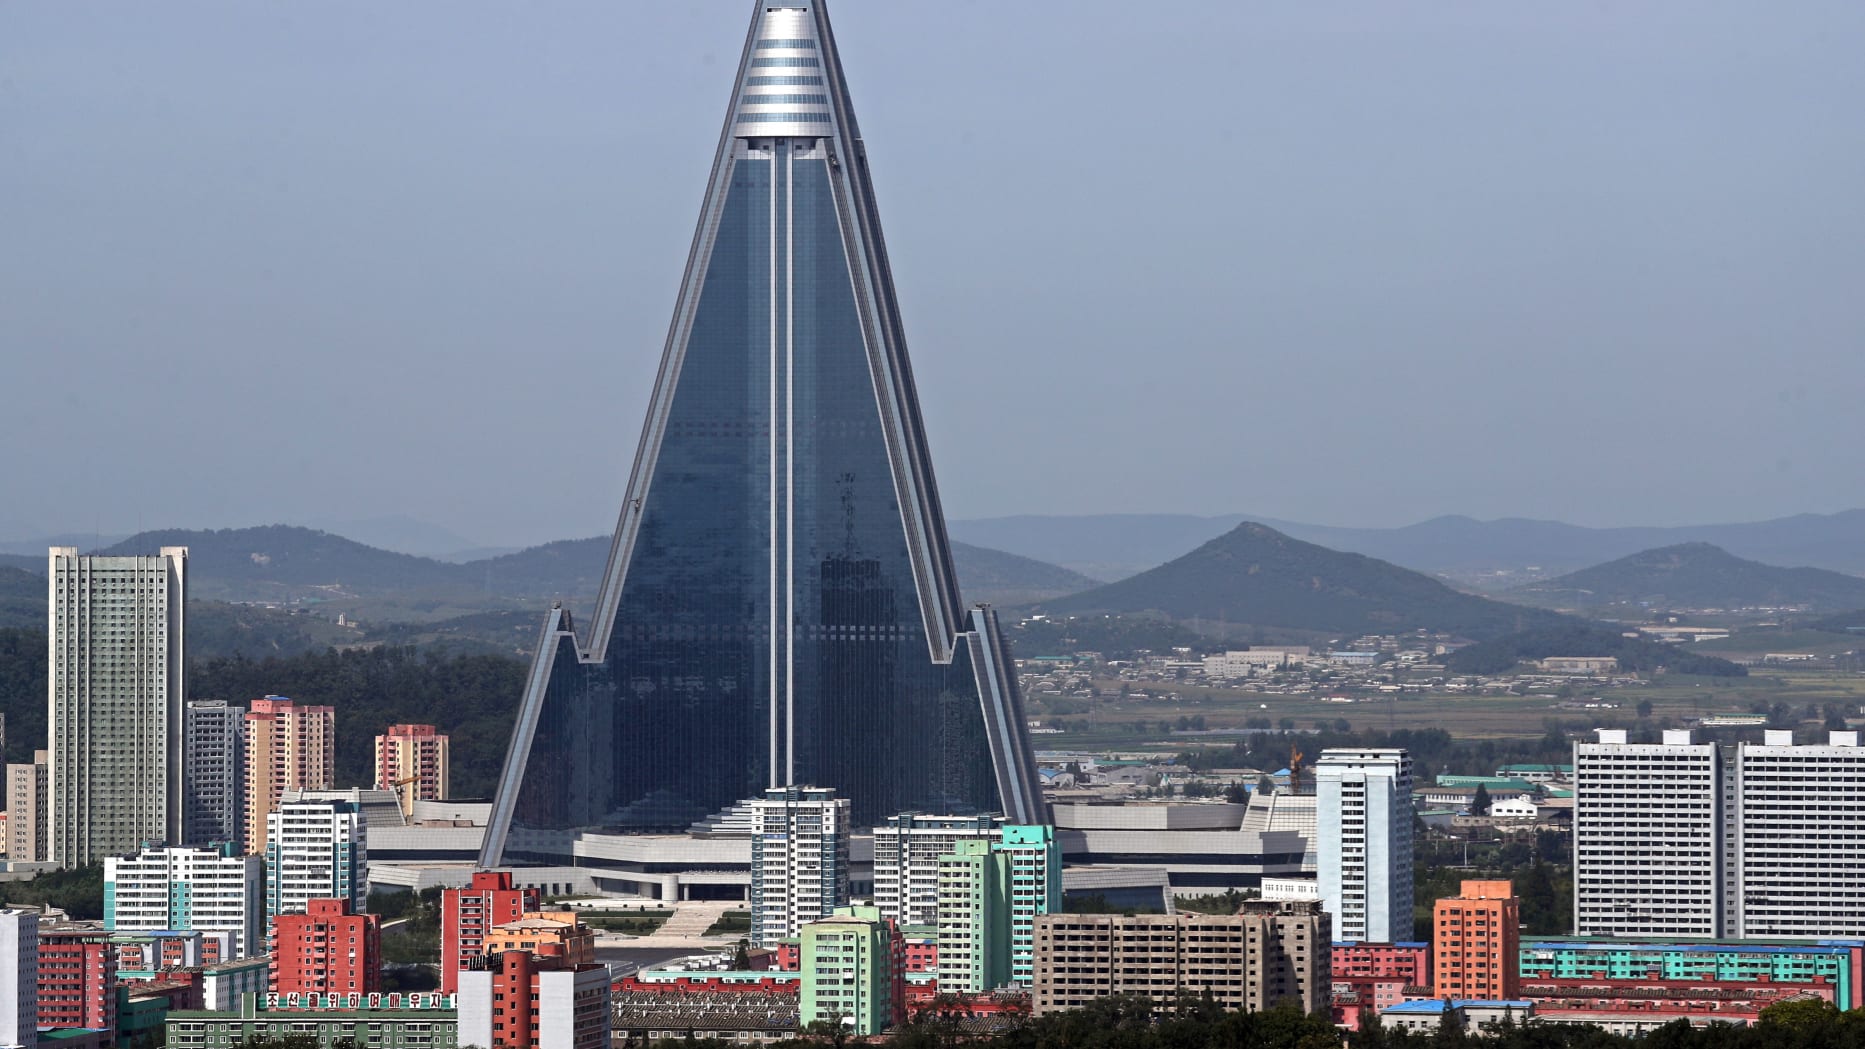 PYONGYANG, NORTH KOREA - SEPTEMBER 11, 2018: A view of the Ryugyong Hotel, a 105-story, 330-metre-tall pyramid-shaped skyscraper, in the city of Pyongyang. Alexander Demianchuk/TASS (Photo by Alexander Demianchuk\TASS via Getty Images)